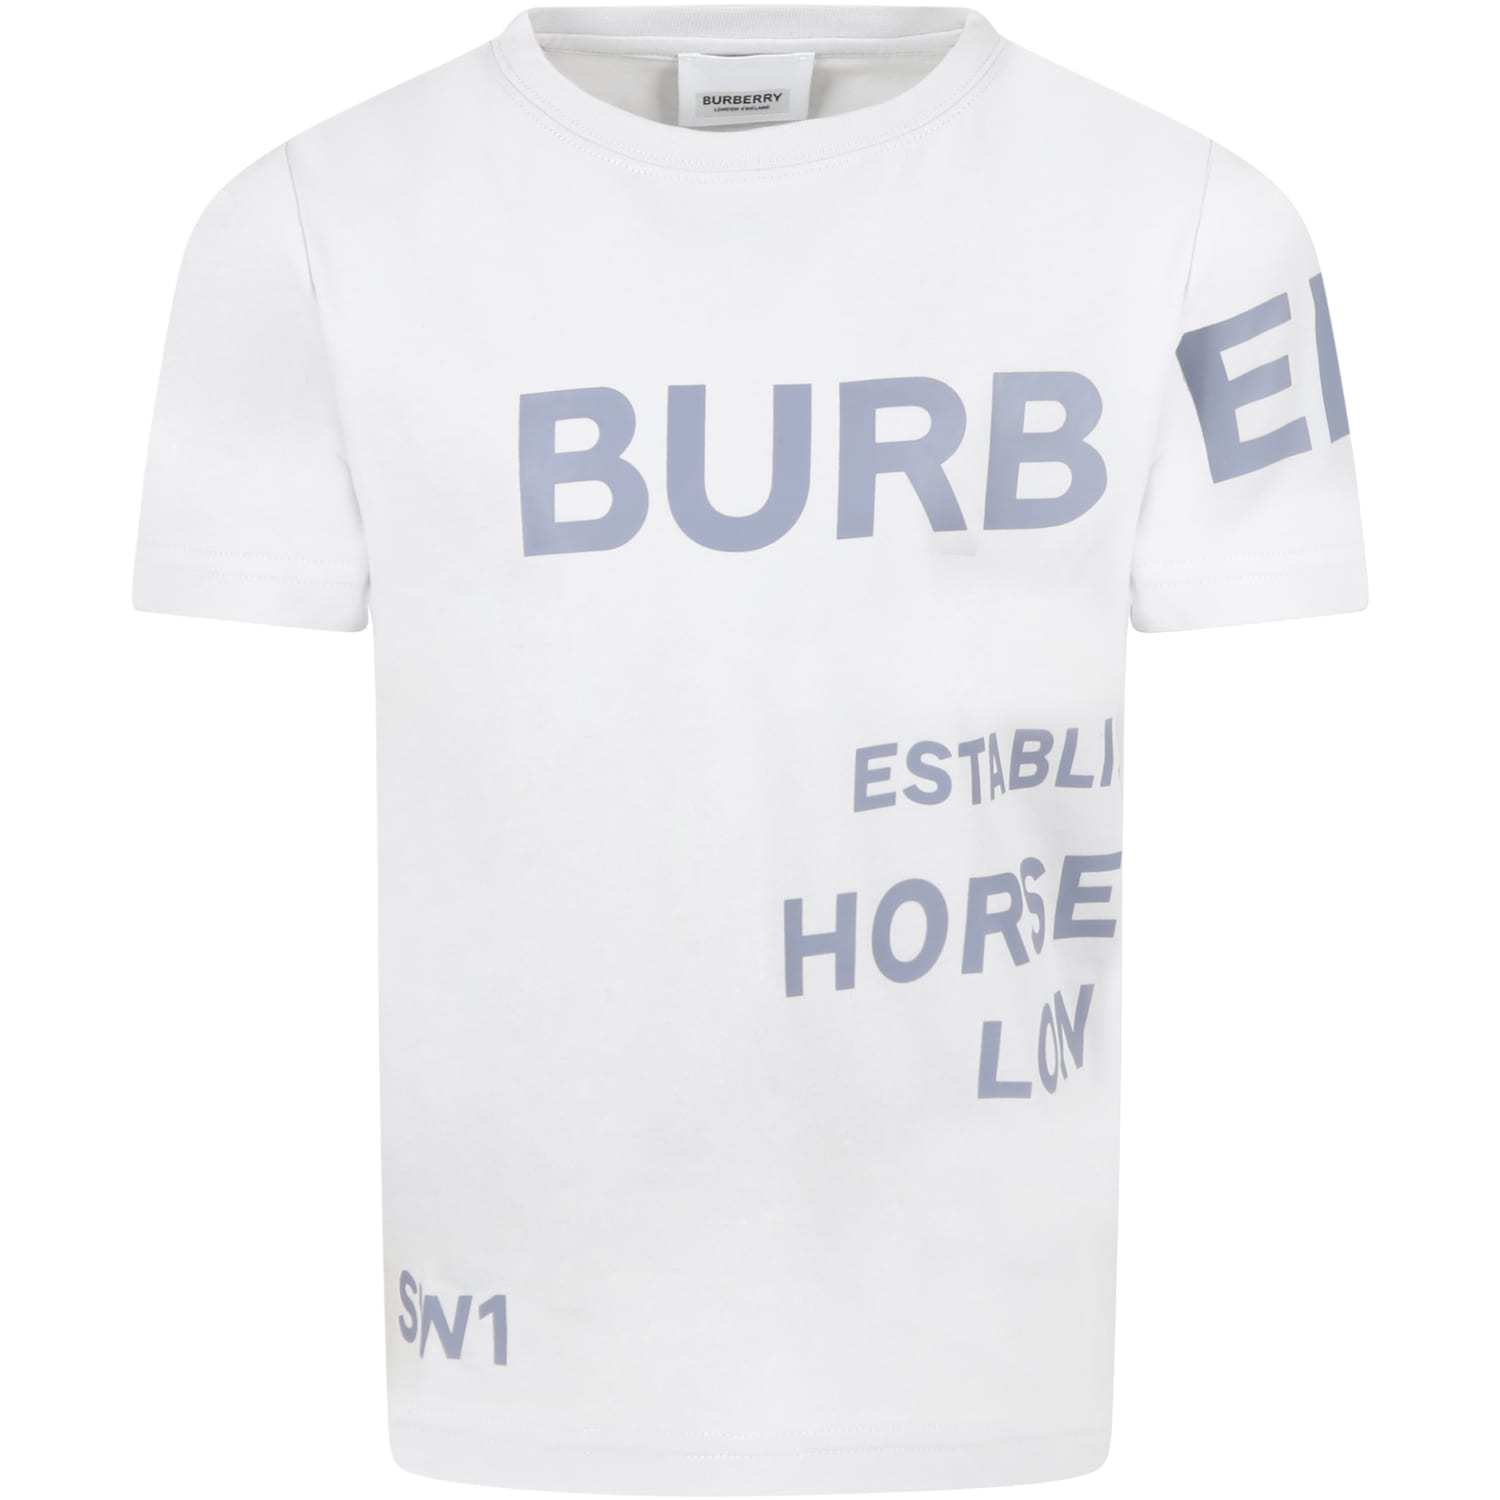 Burberry Gray T-shirt For Kids With Gray Logo